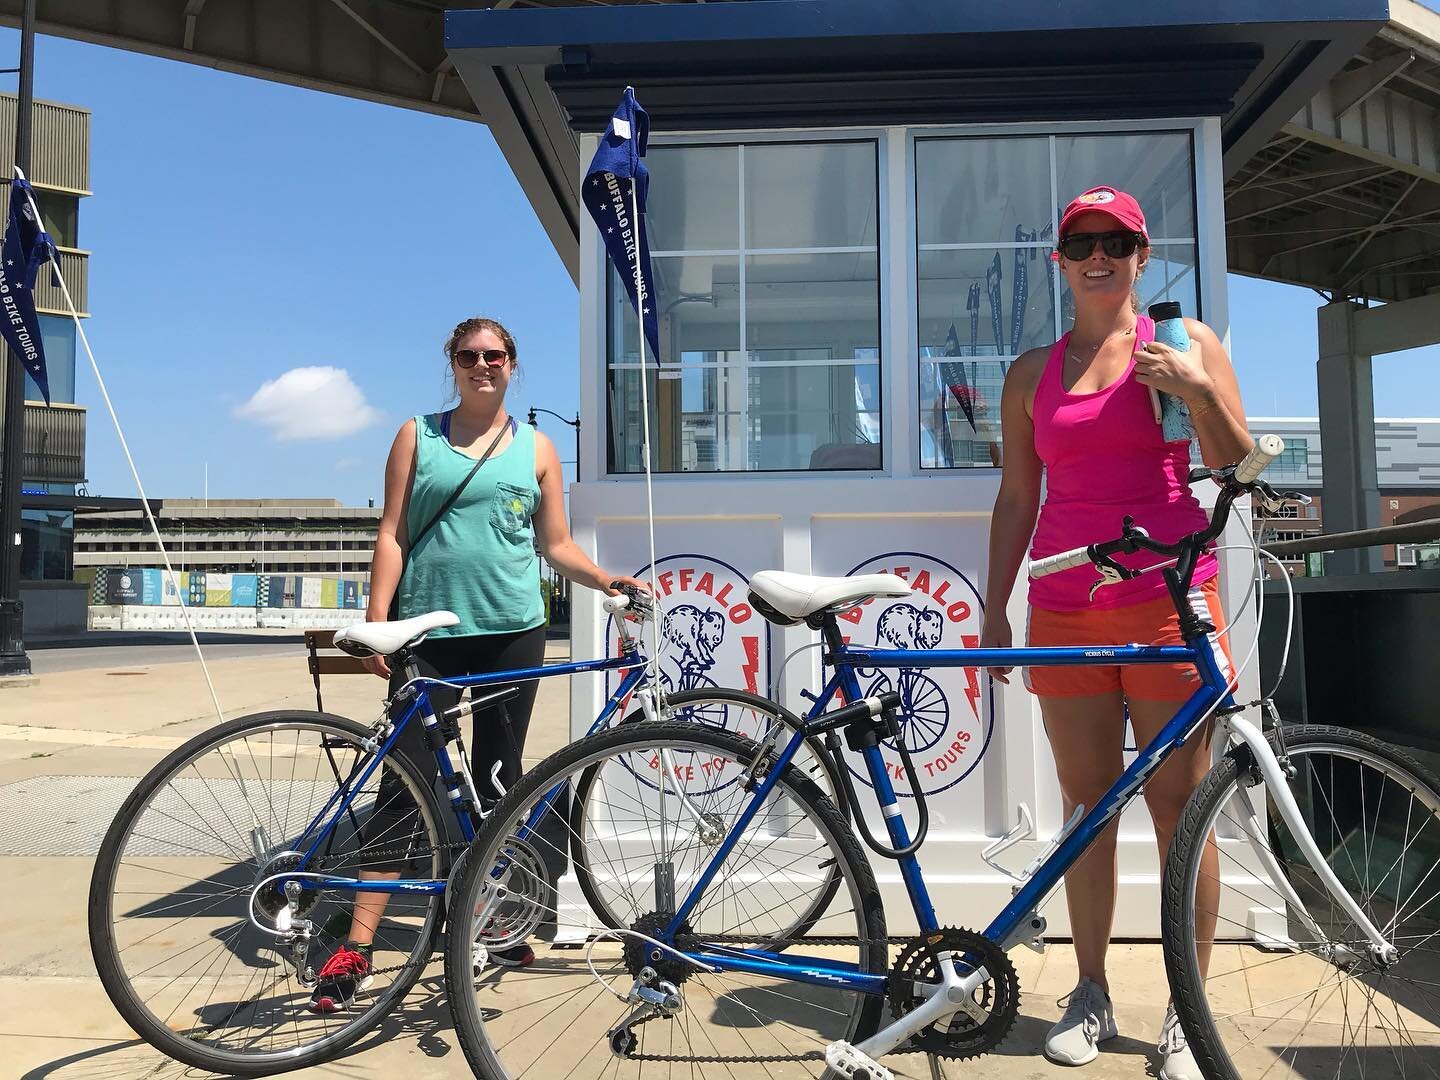 Buffalo Bike Tours is affordable for everyone